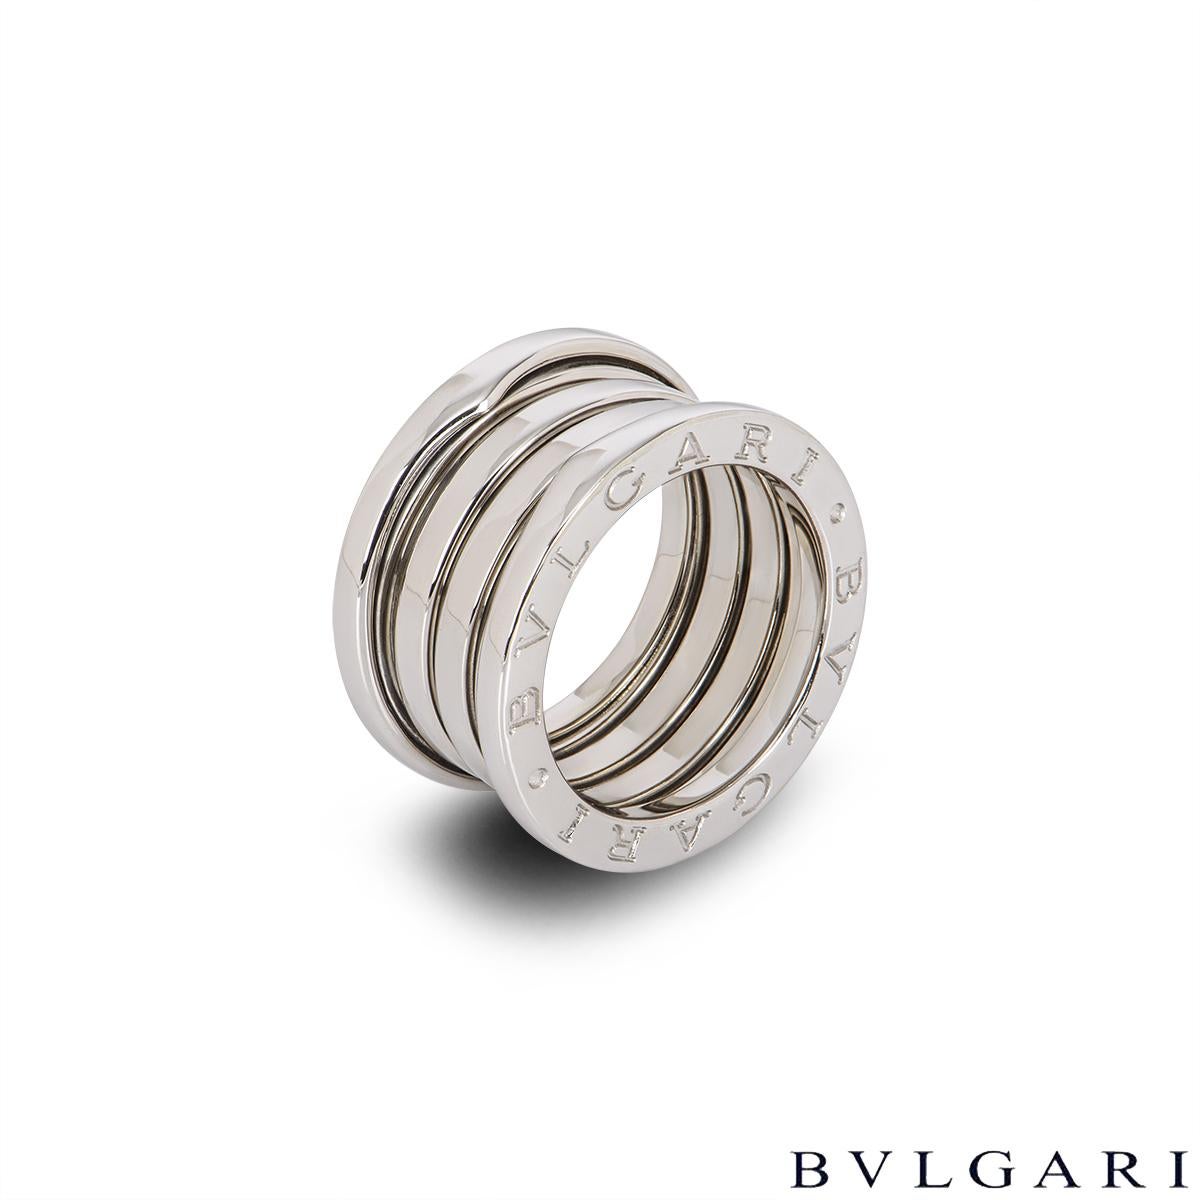 A classic 18k white gold ring by Bvlgari from the B.Zero1 collection. The ring comprises of 3 spiral design bands with the iconic 'Bvlgari Bvlgari' logo engraved around the outer edges. The ring is a size UK K - EU 50 and has a gross weight of 11.5